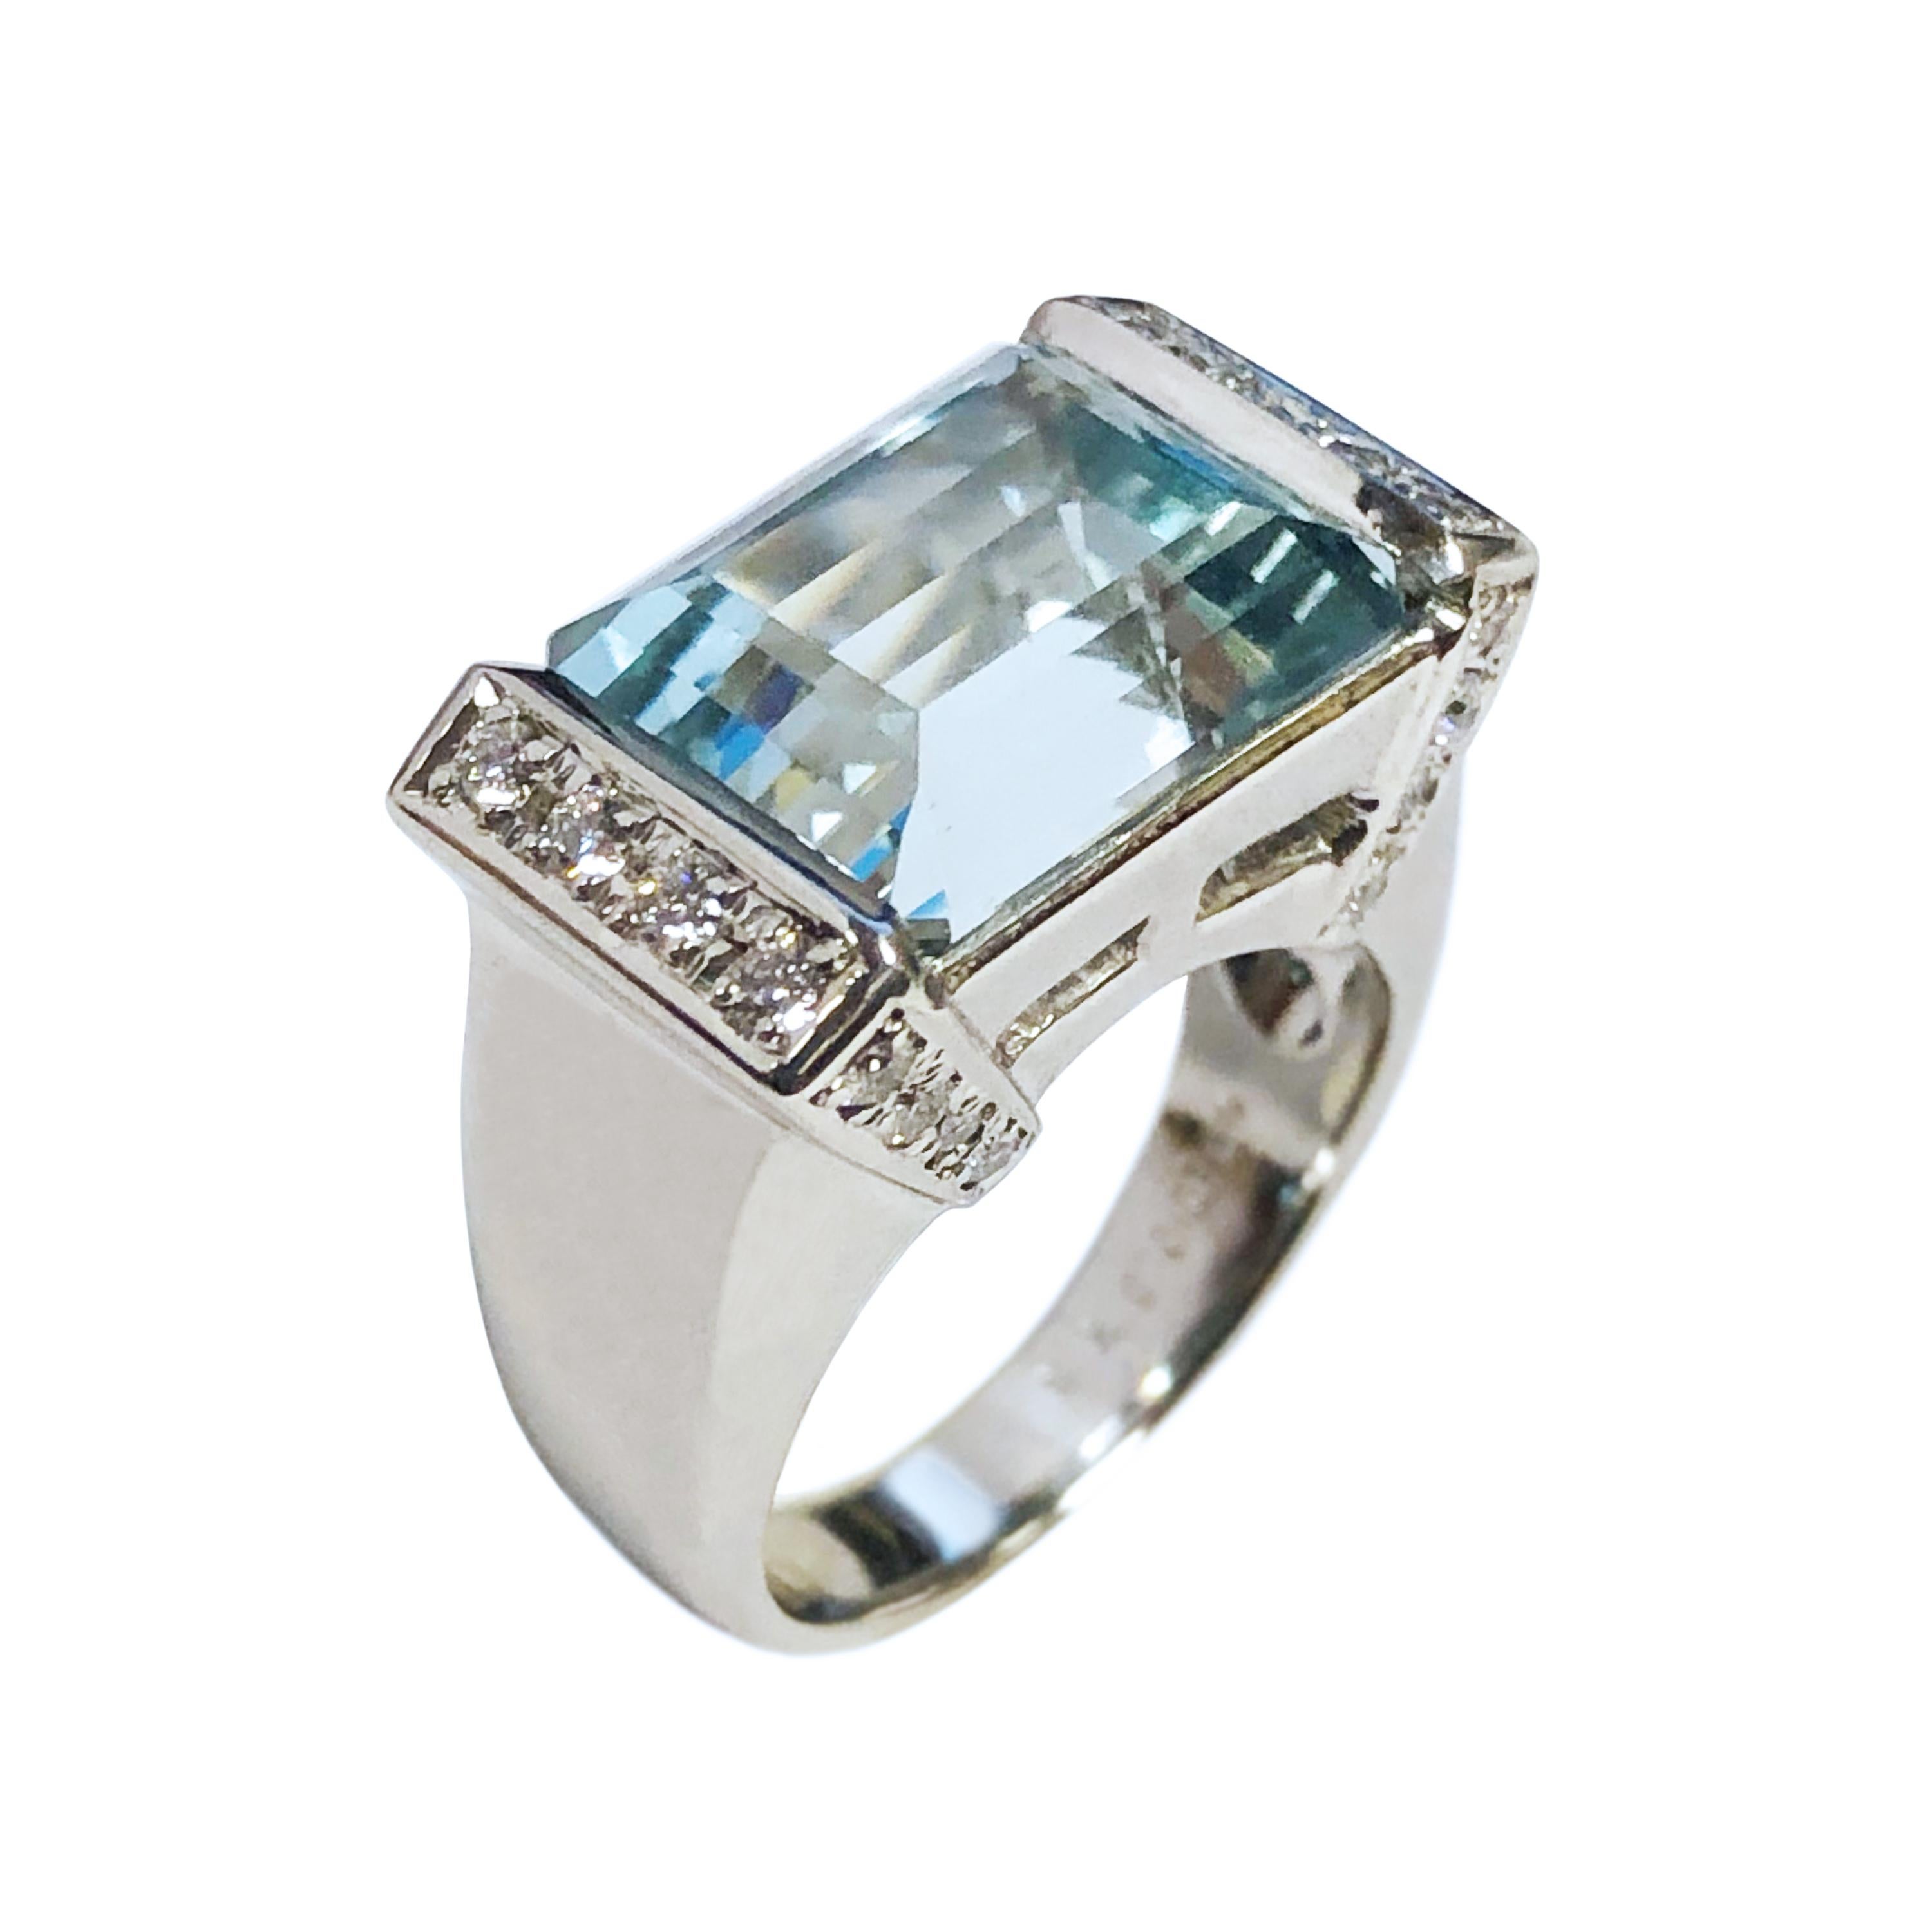 Circa 2010 Platinum Ring in an Art Deco style centrally set with a Fine Color step cut Aquamarine measuring 12 x 10 M.M. approximately 8 Carats and surrounded by Round Brilliant cut Diamonds totaling .75 Cart. The top of the ring measures 3/4 X 7